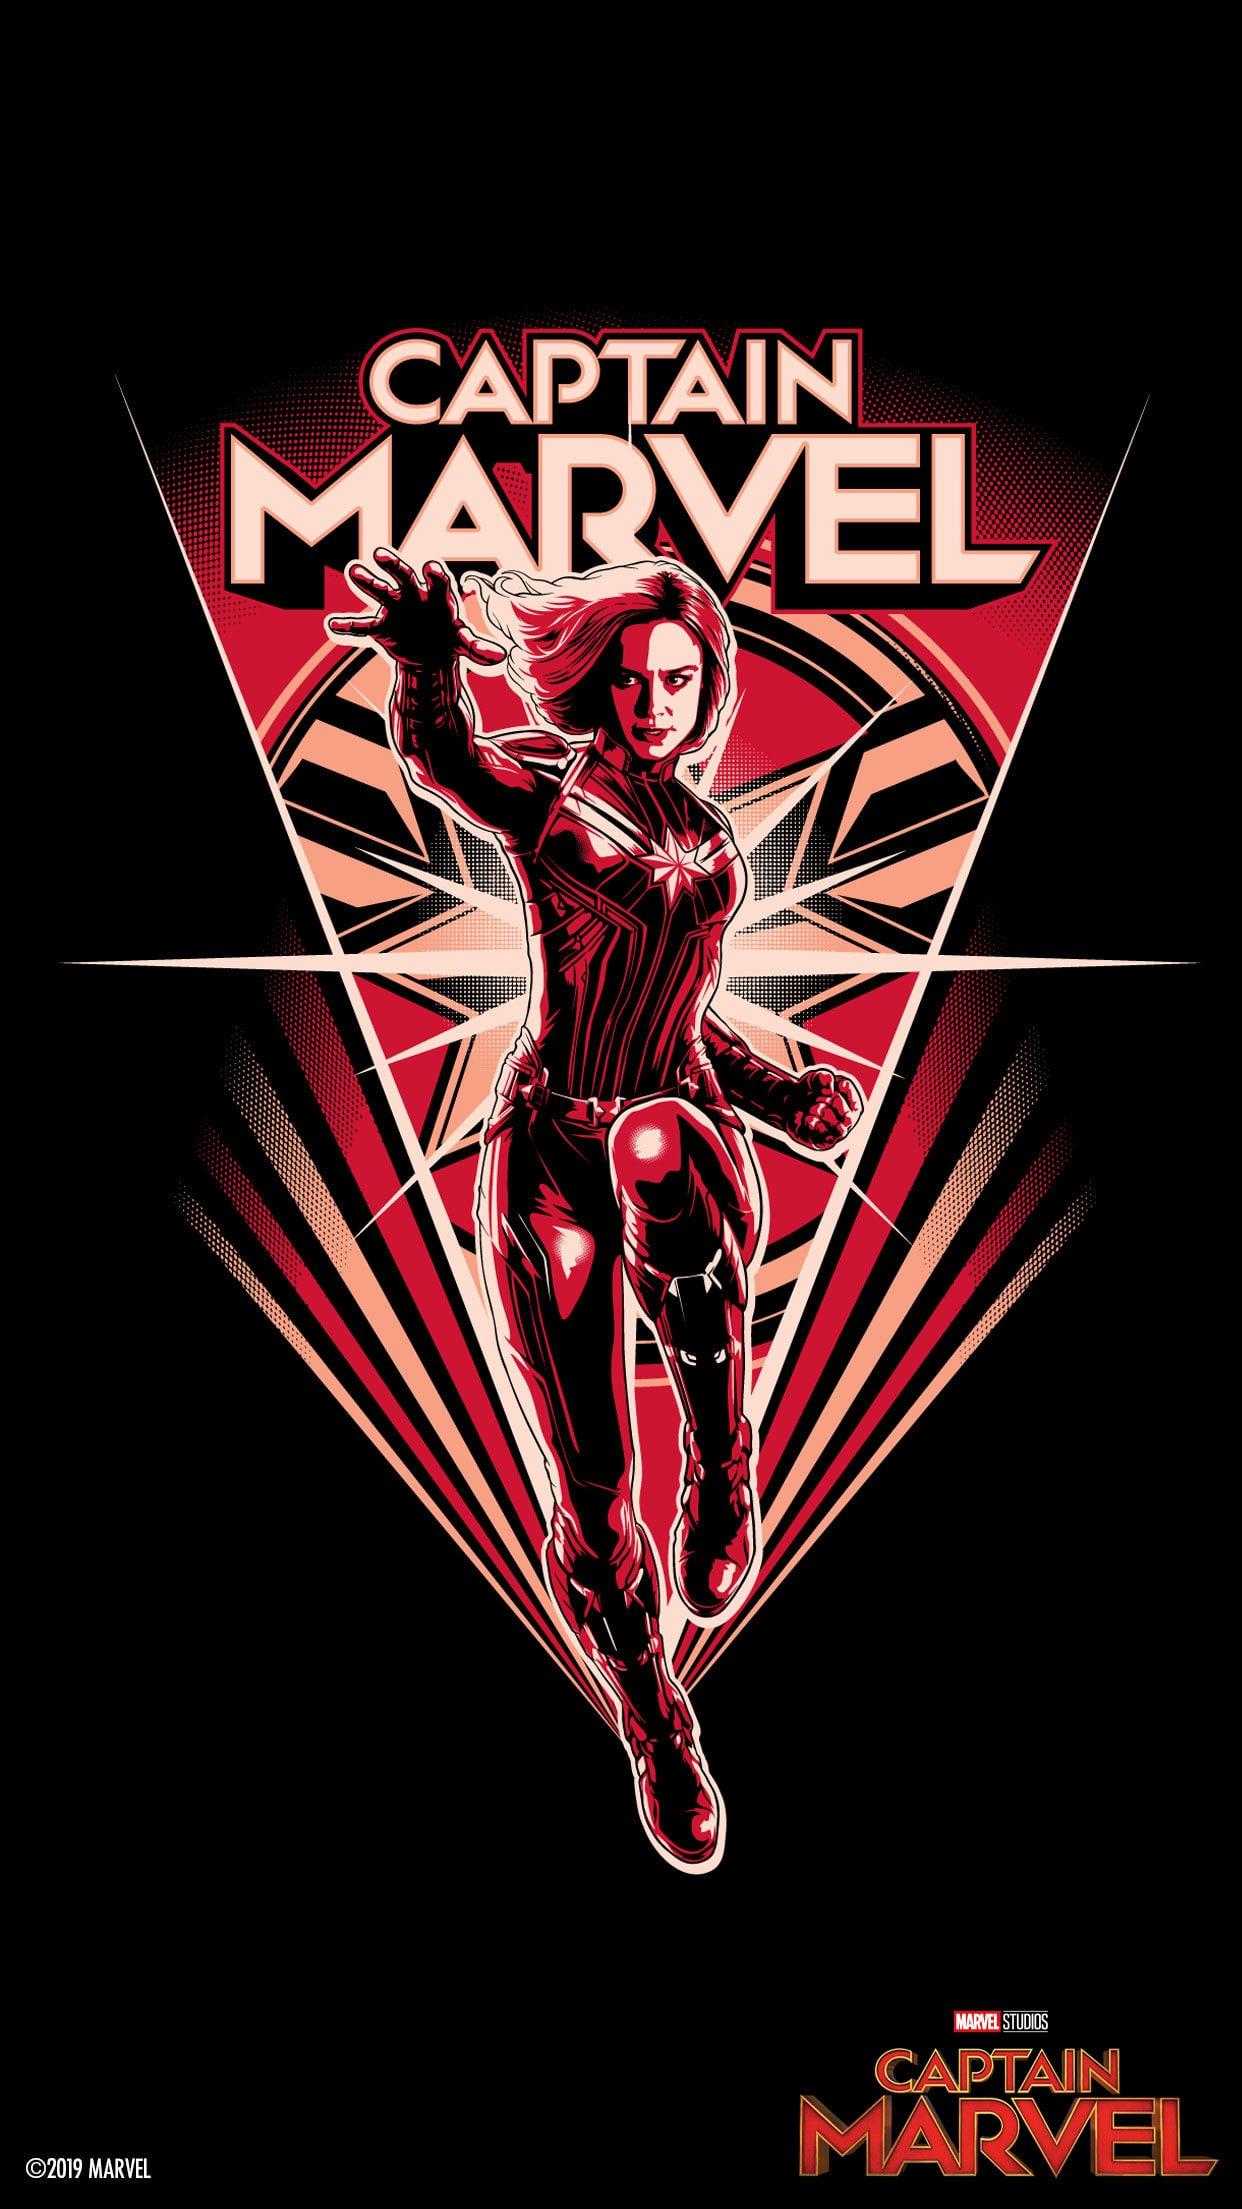 Captain Marvel Wallpapers, HD Captain Marvel Backgrounds, Free Images  Download